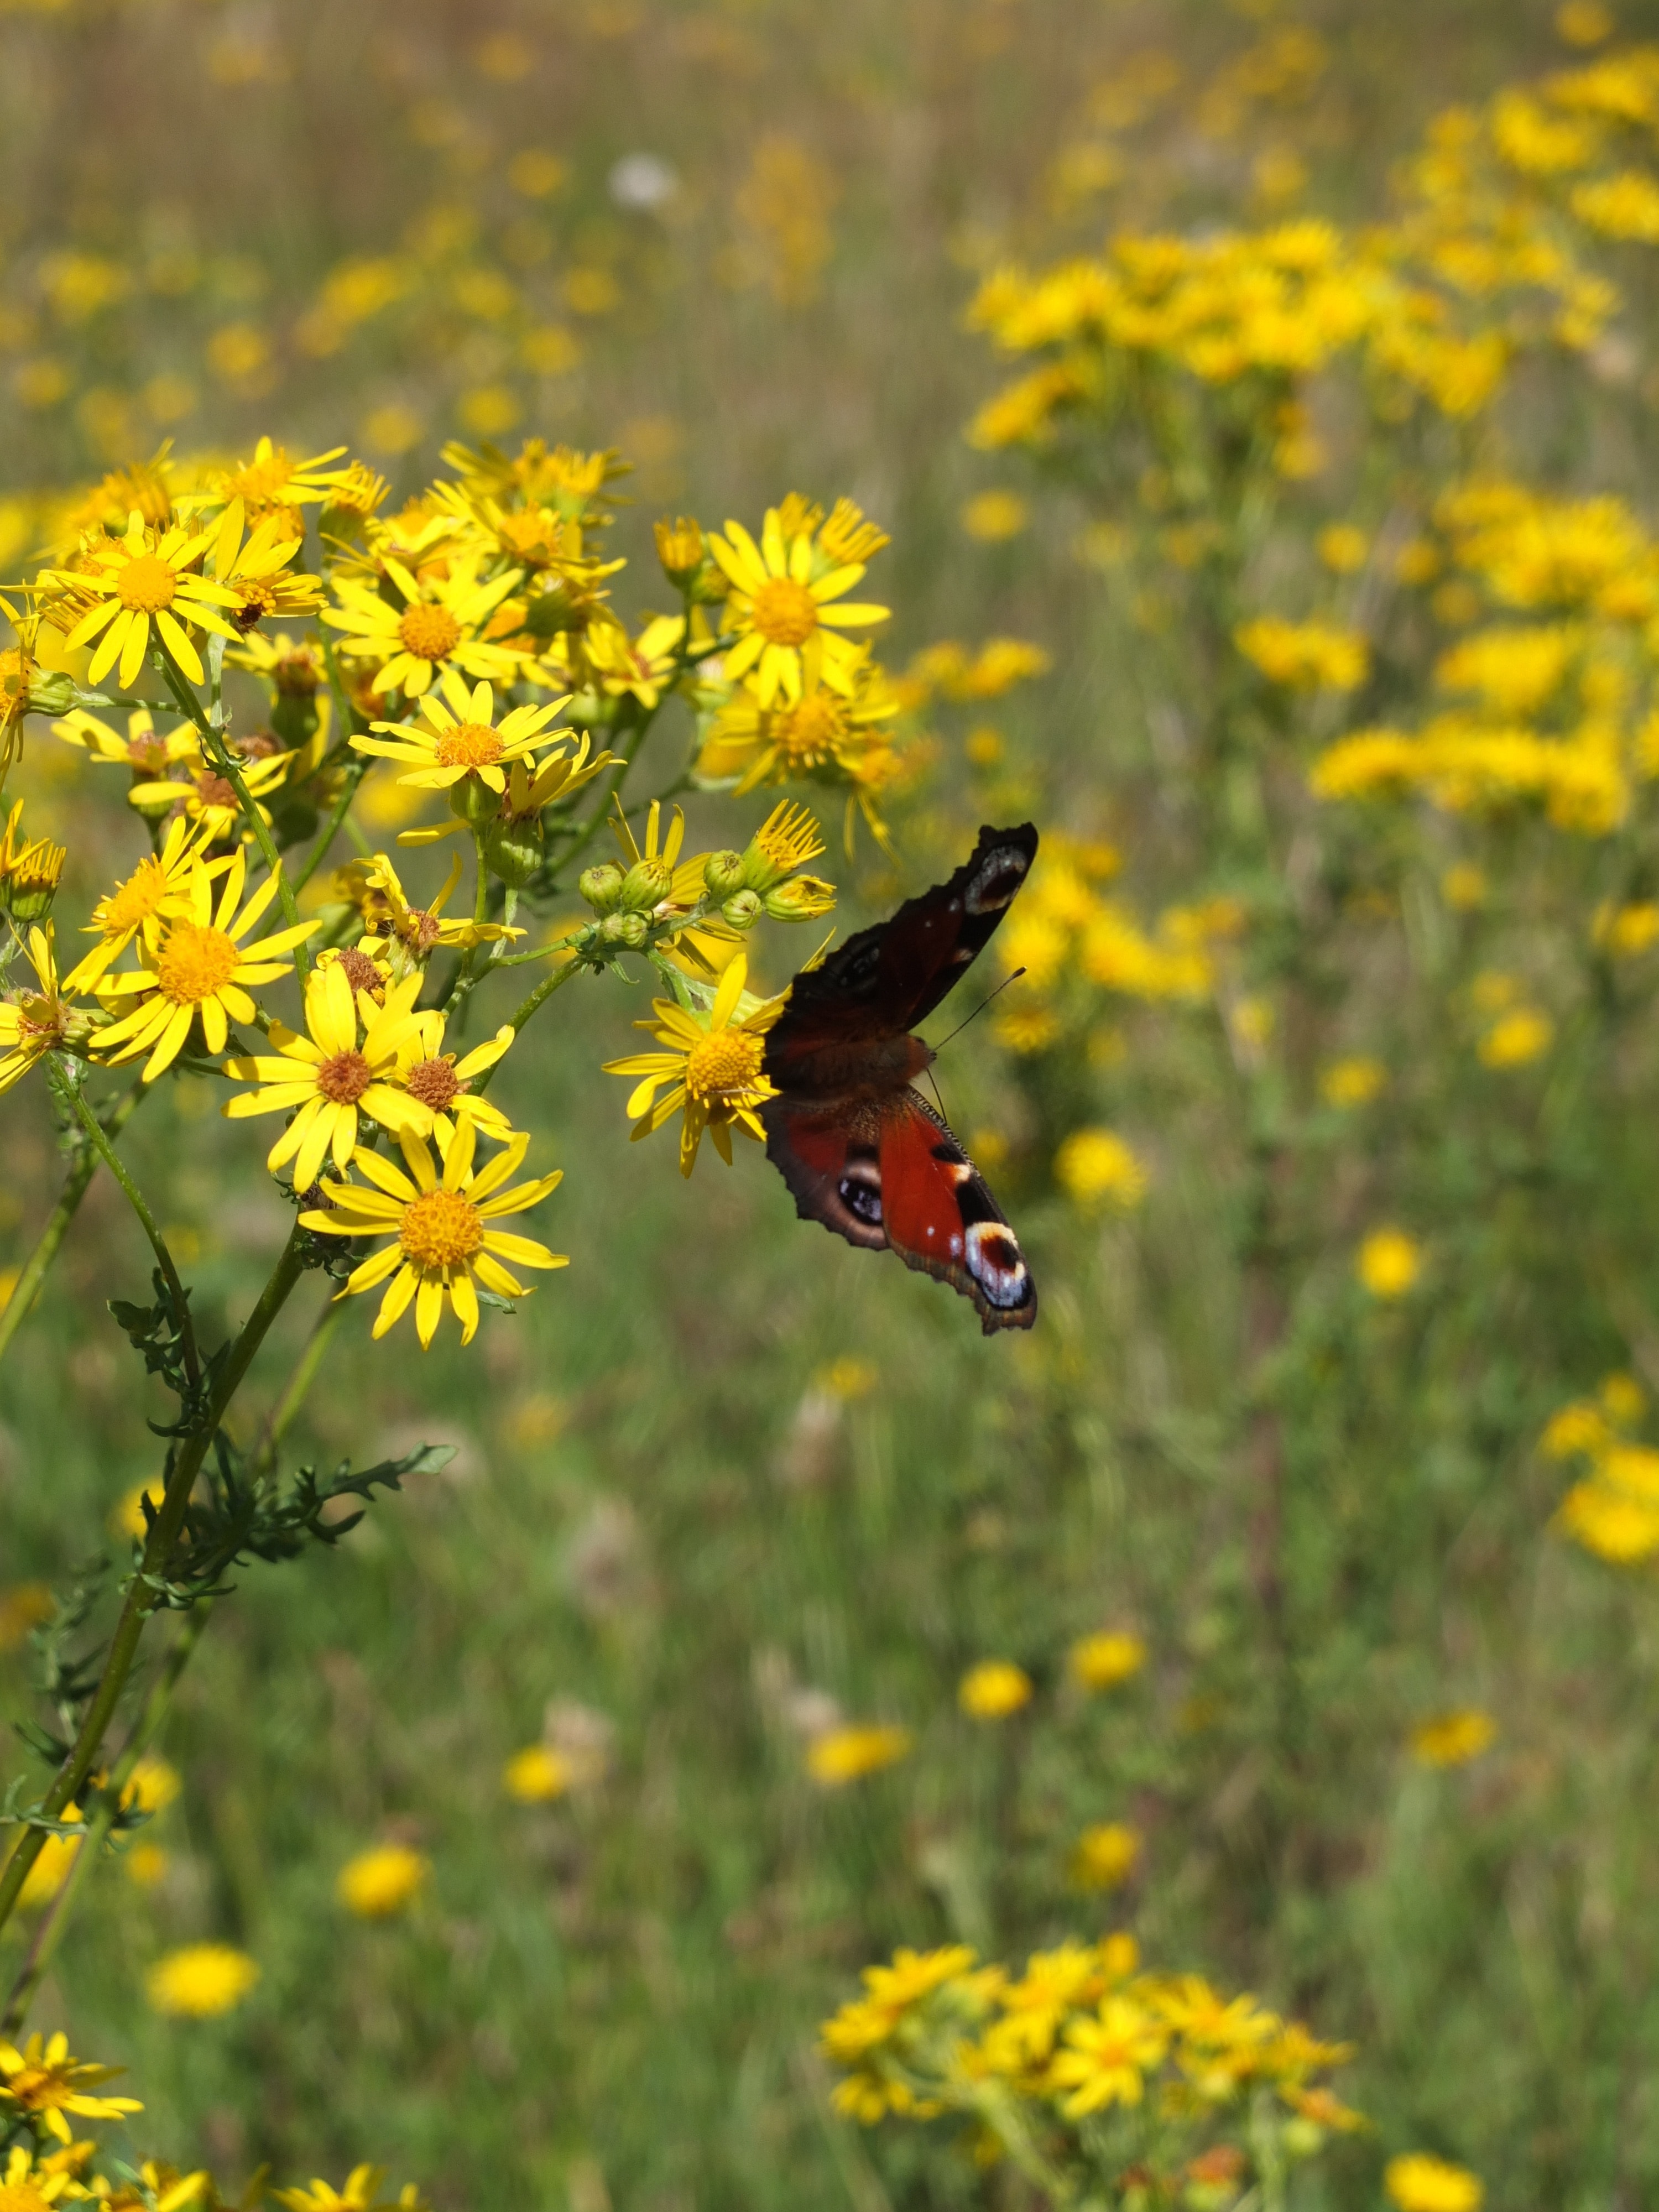 brown butterfly on yellow petaled flower